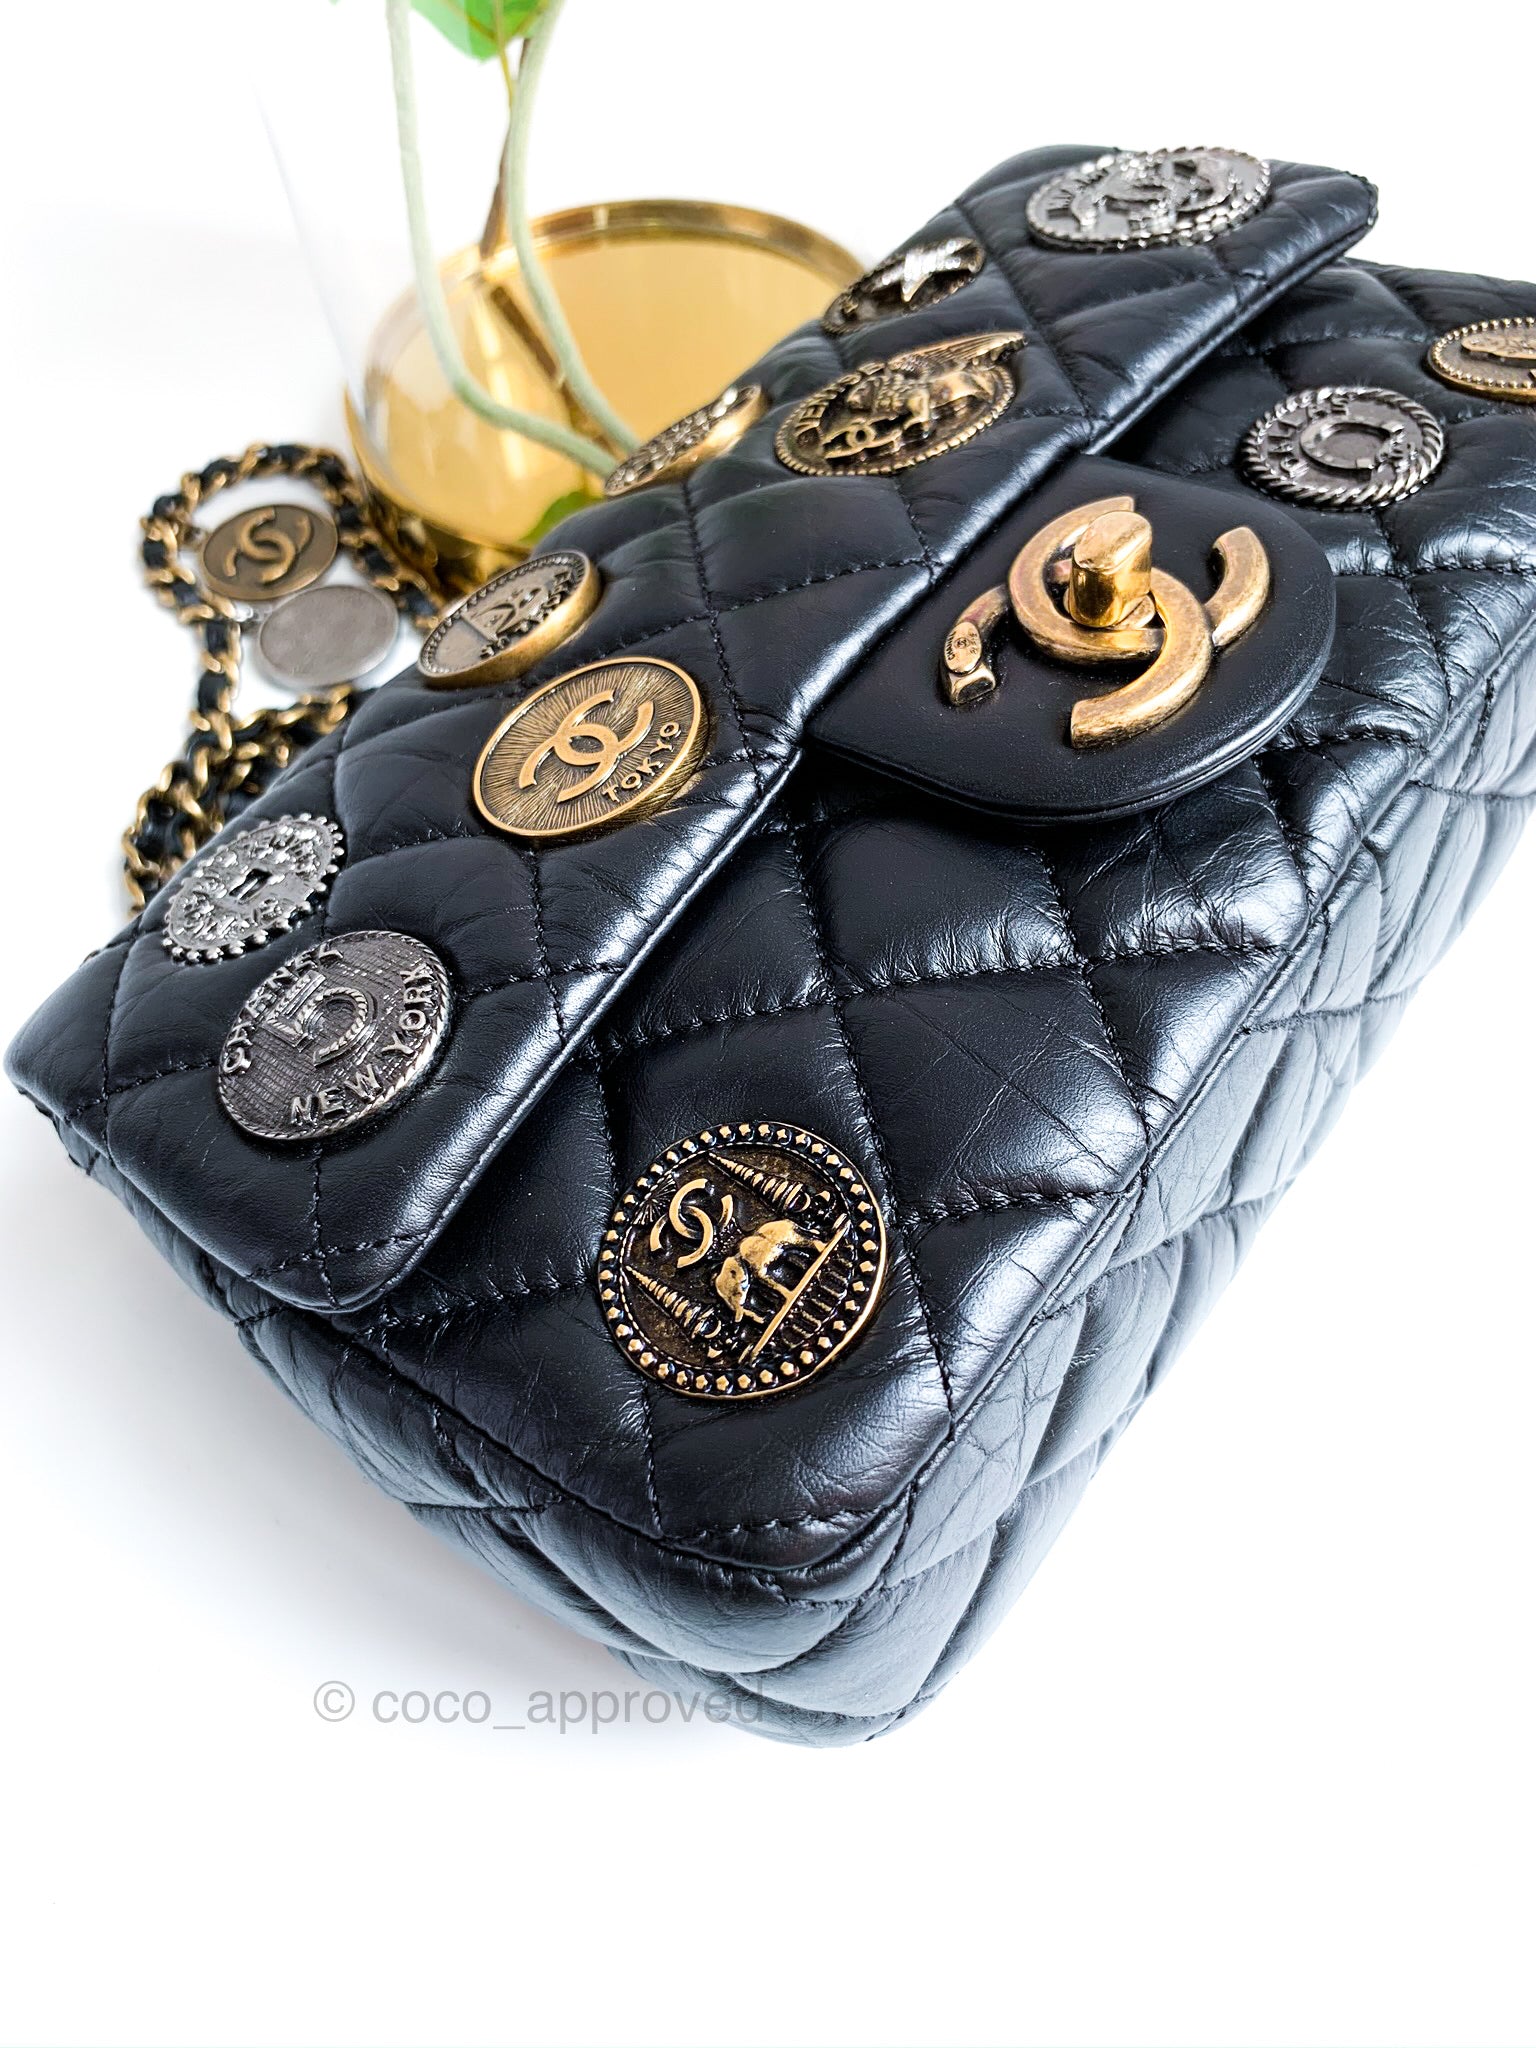 Chanel Limited Edition Aged Calfskin Quilted Mini Medallion Flap